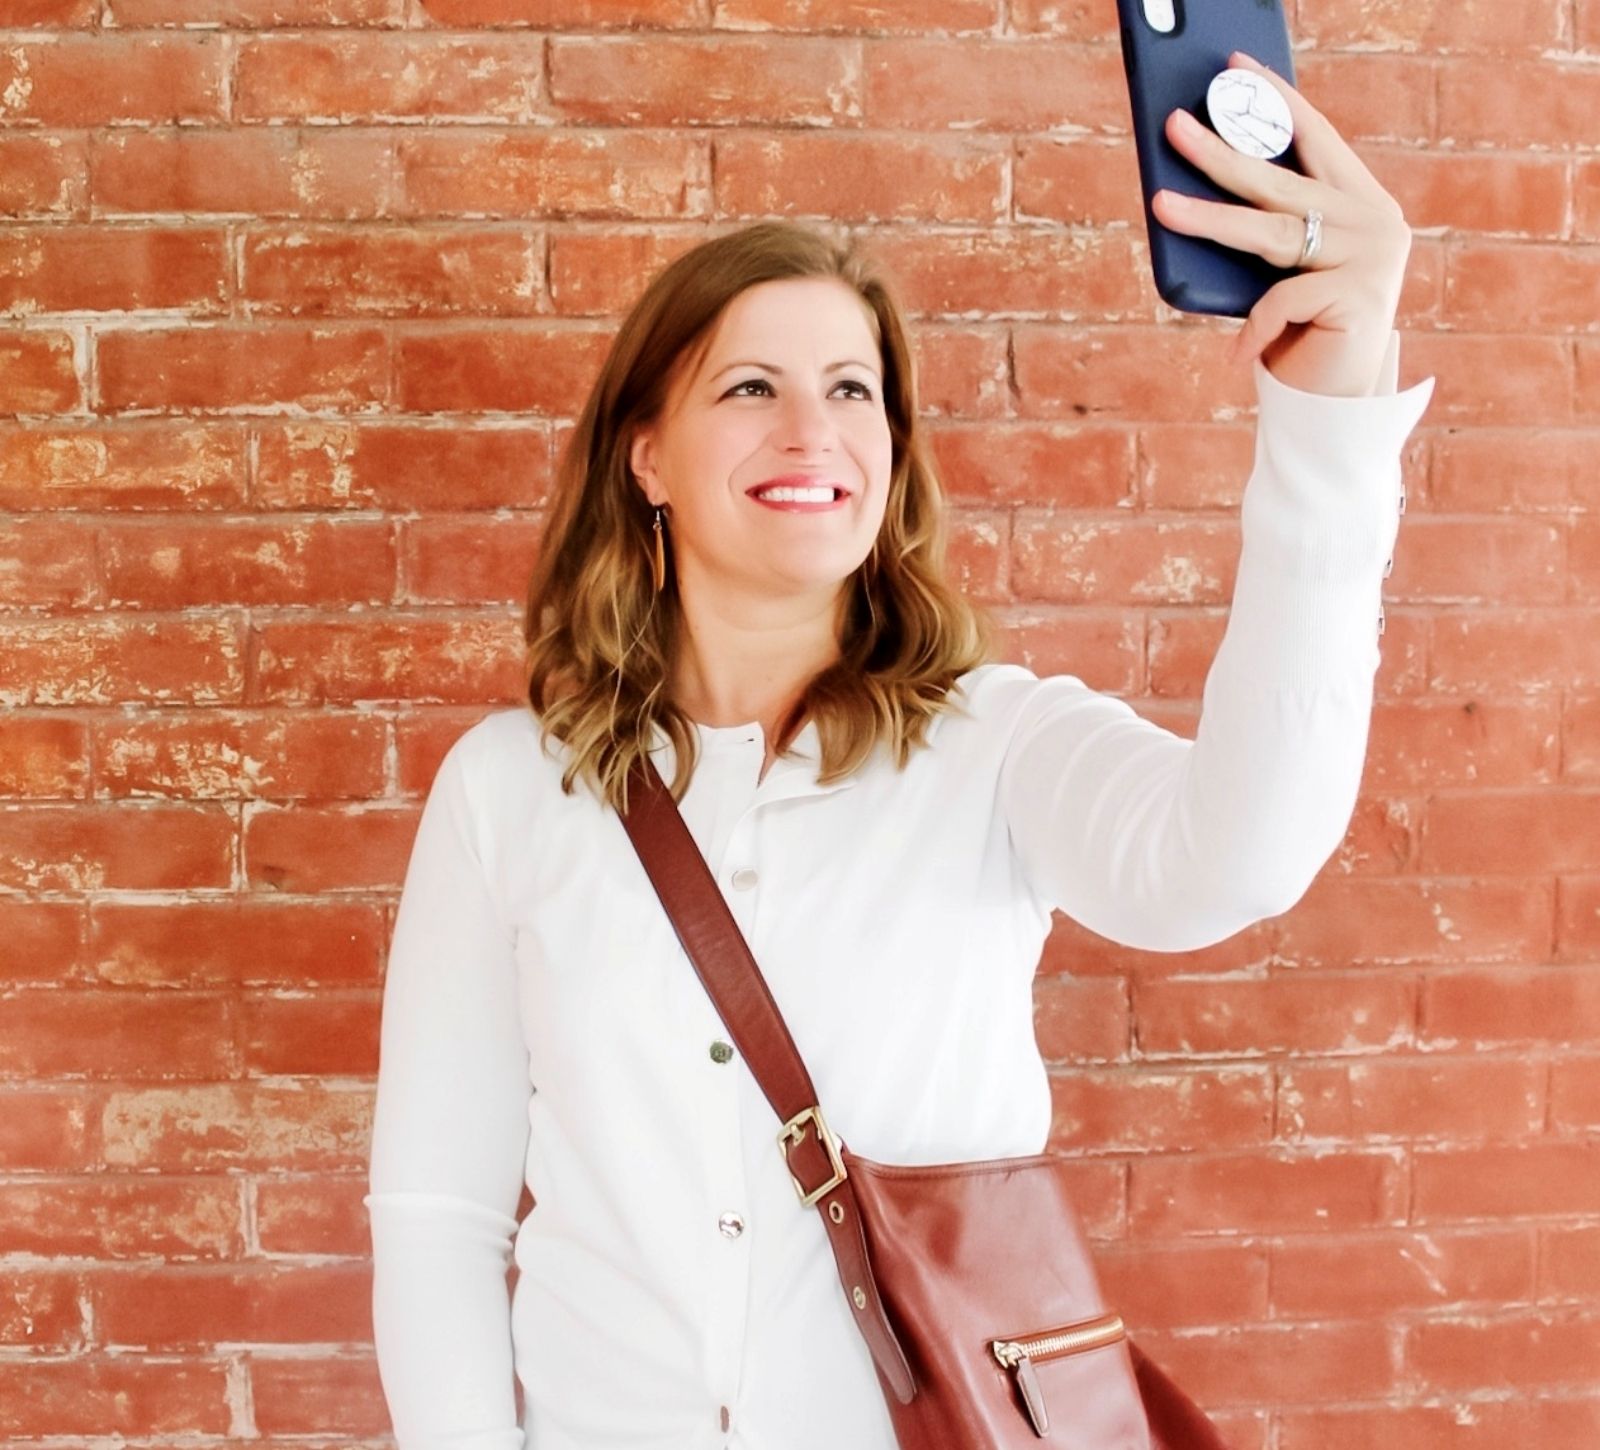 Tracy Smith, Founder of Kitchen Table CEOs taking a selfie and demonstrating how to take a picture of yourself for social media.